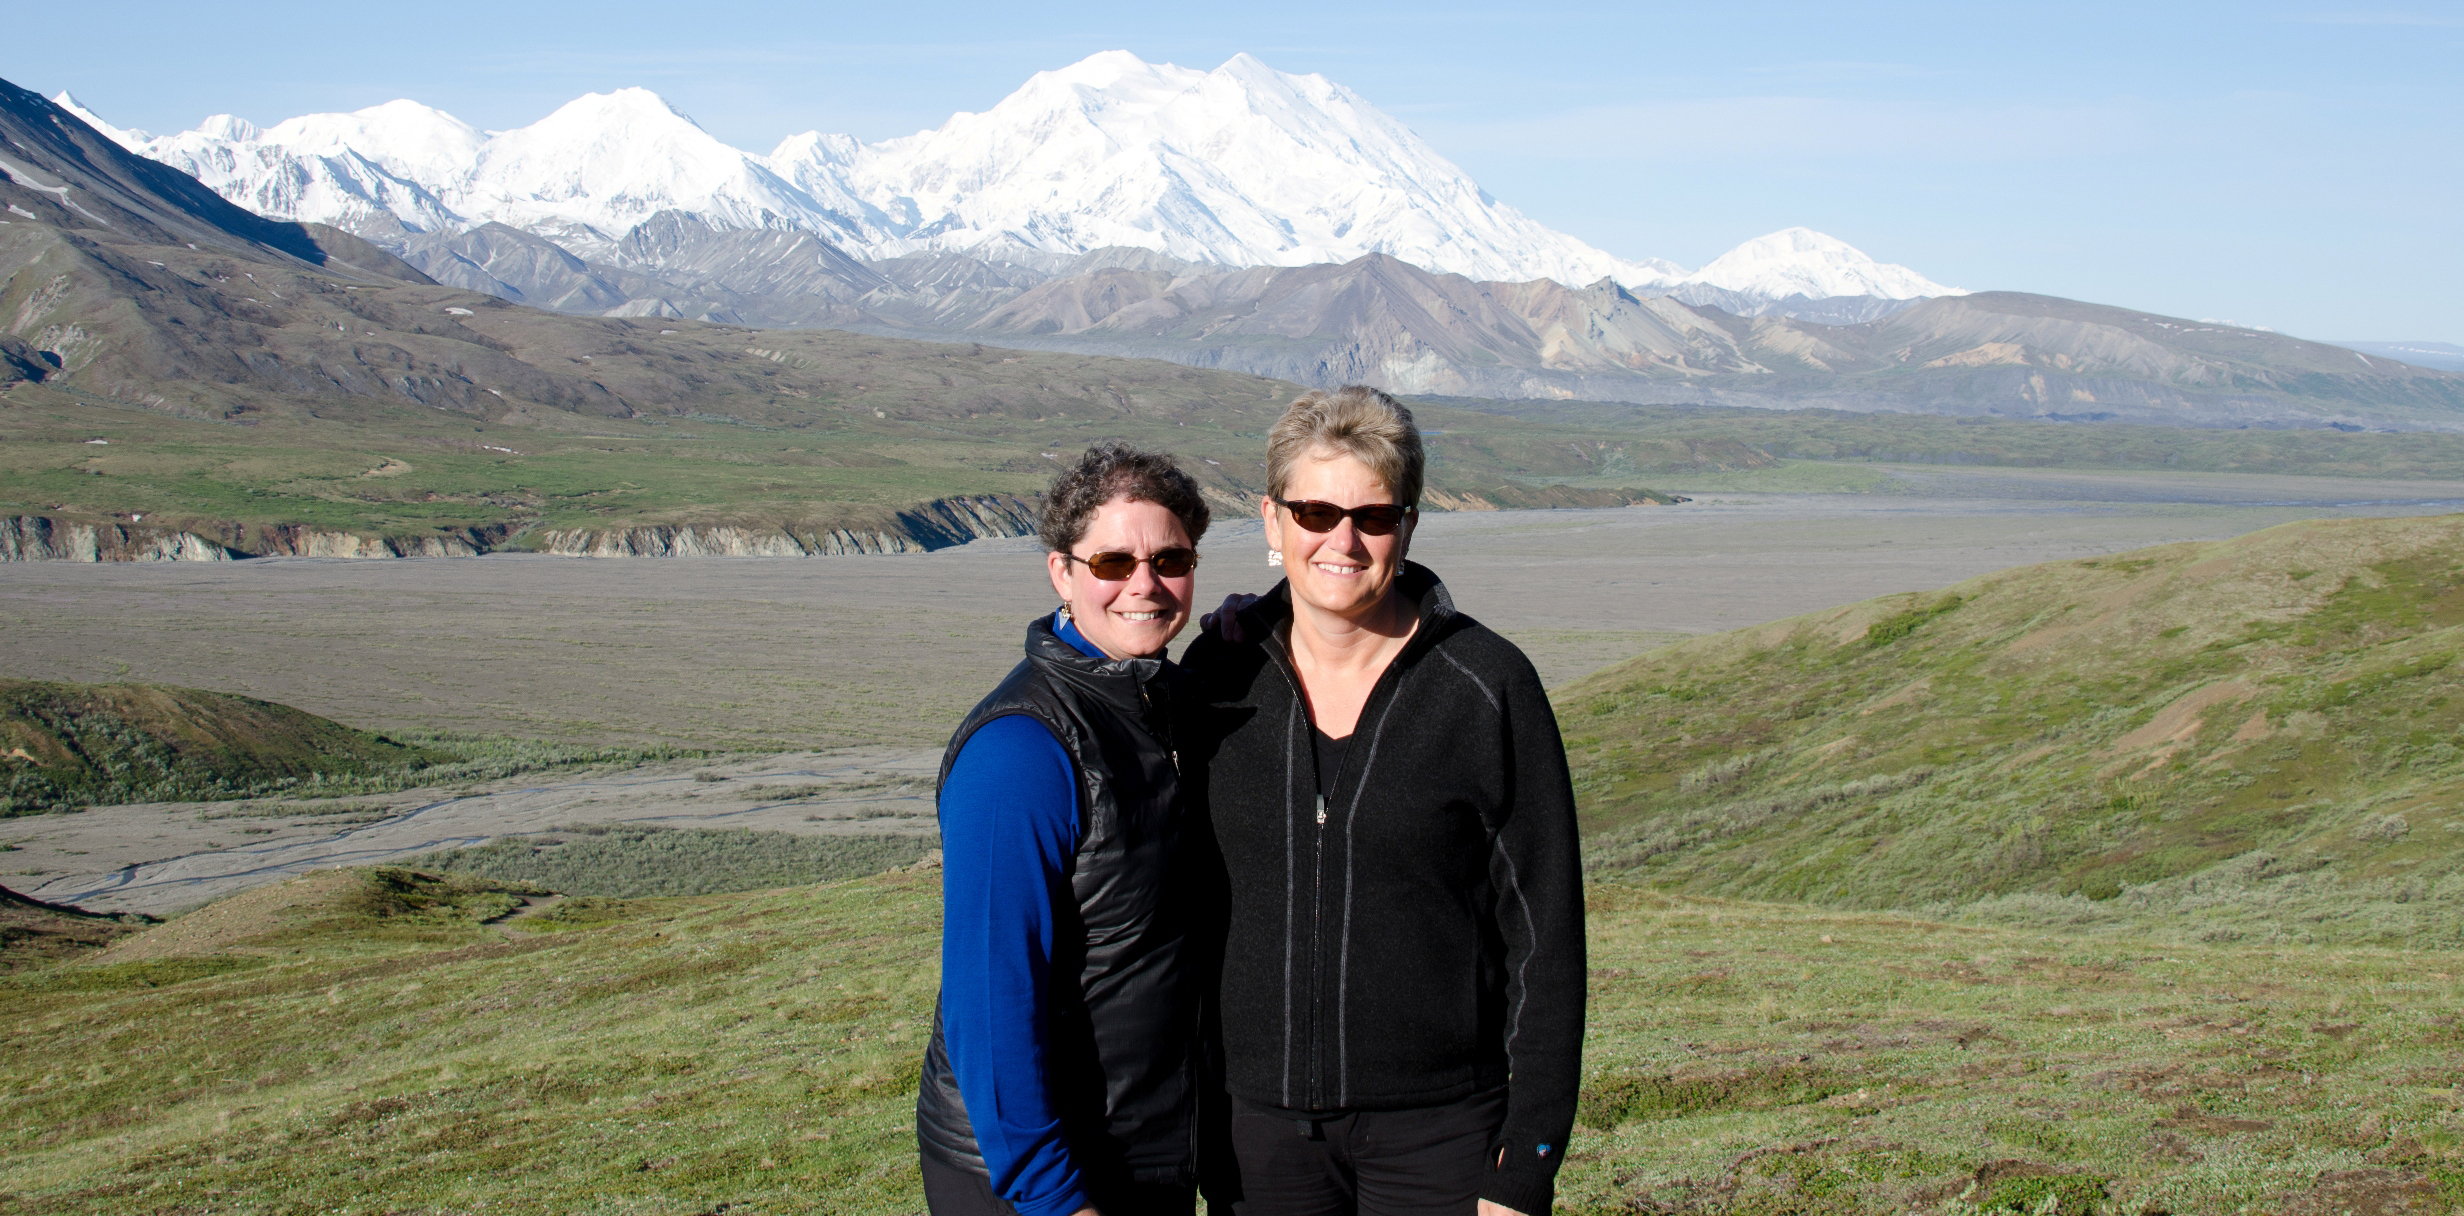 Aimee Olejasz and Fabienne Peter-Contesse at Denali Park in 2011.